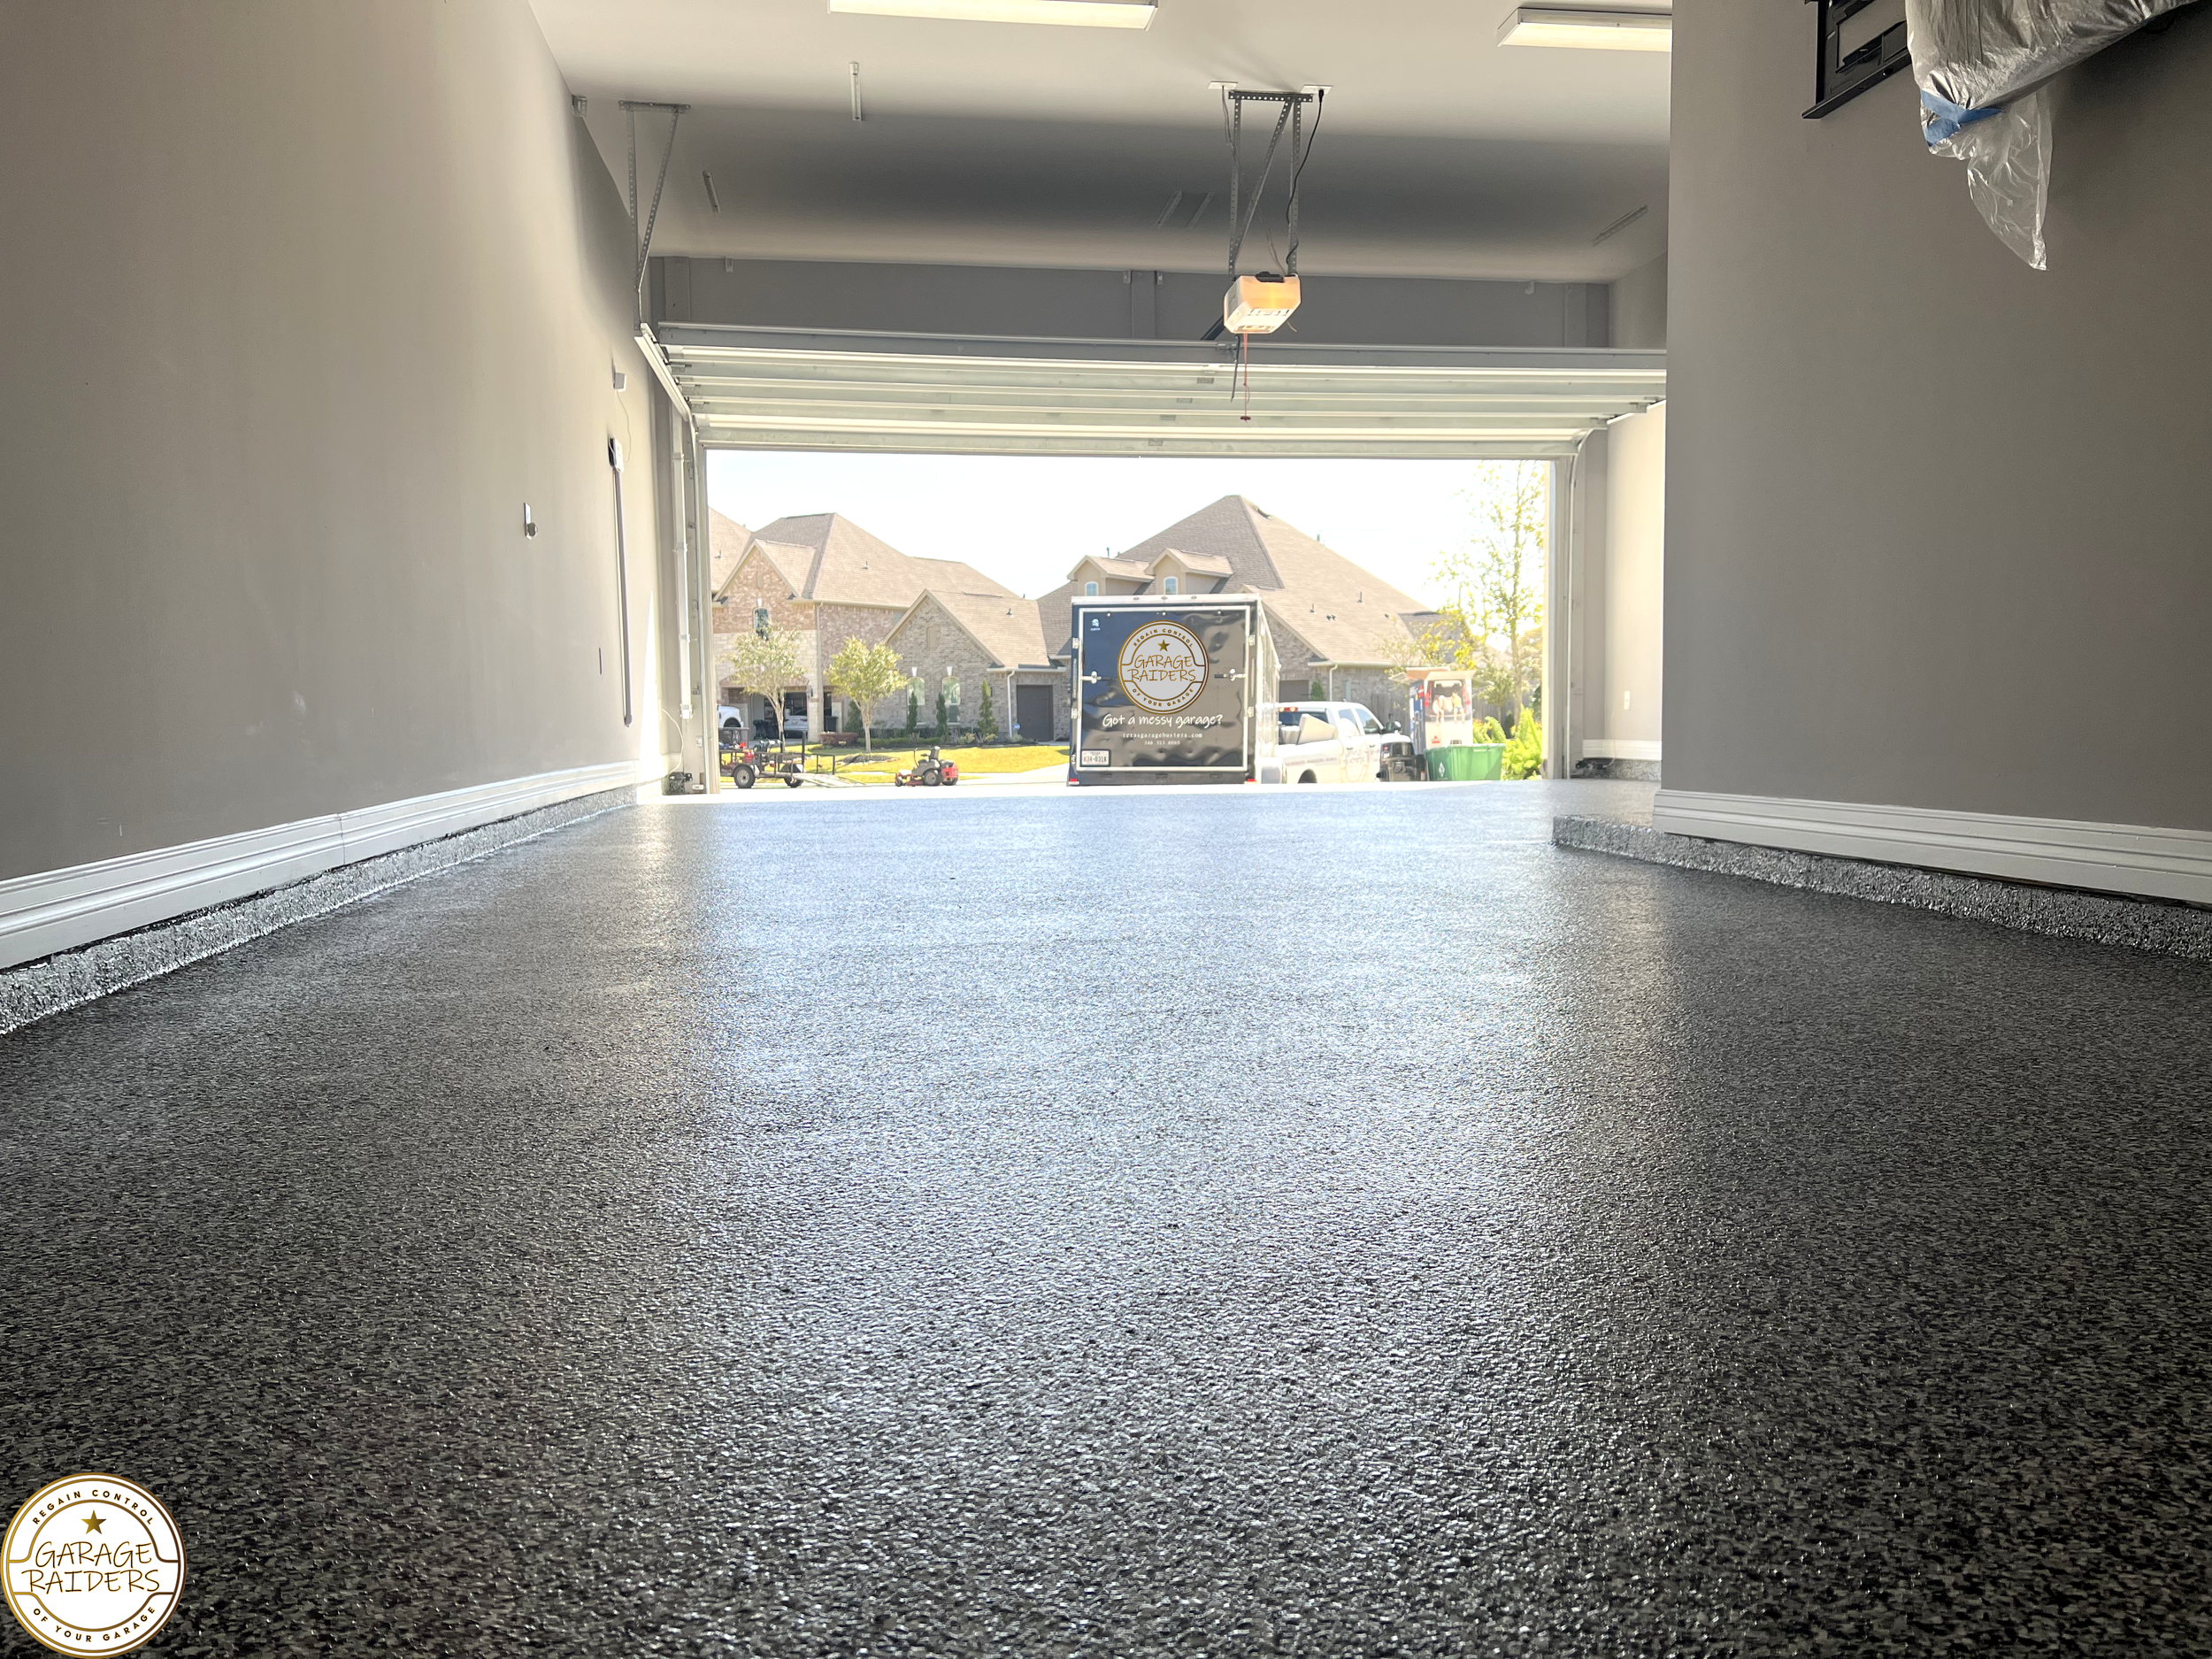 Carpet laying solutions for garages and outdoor spaces in Auckland